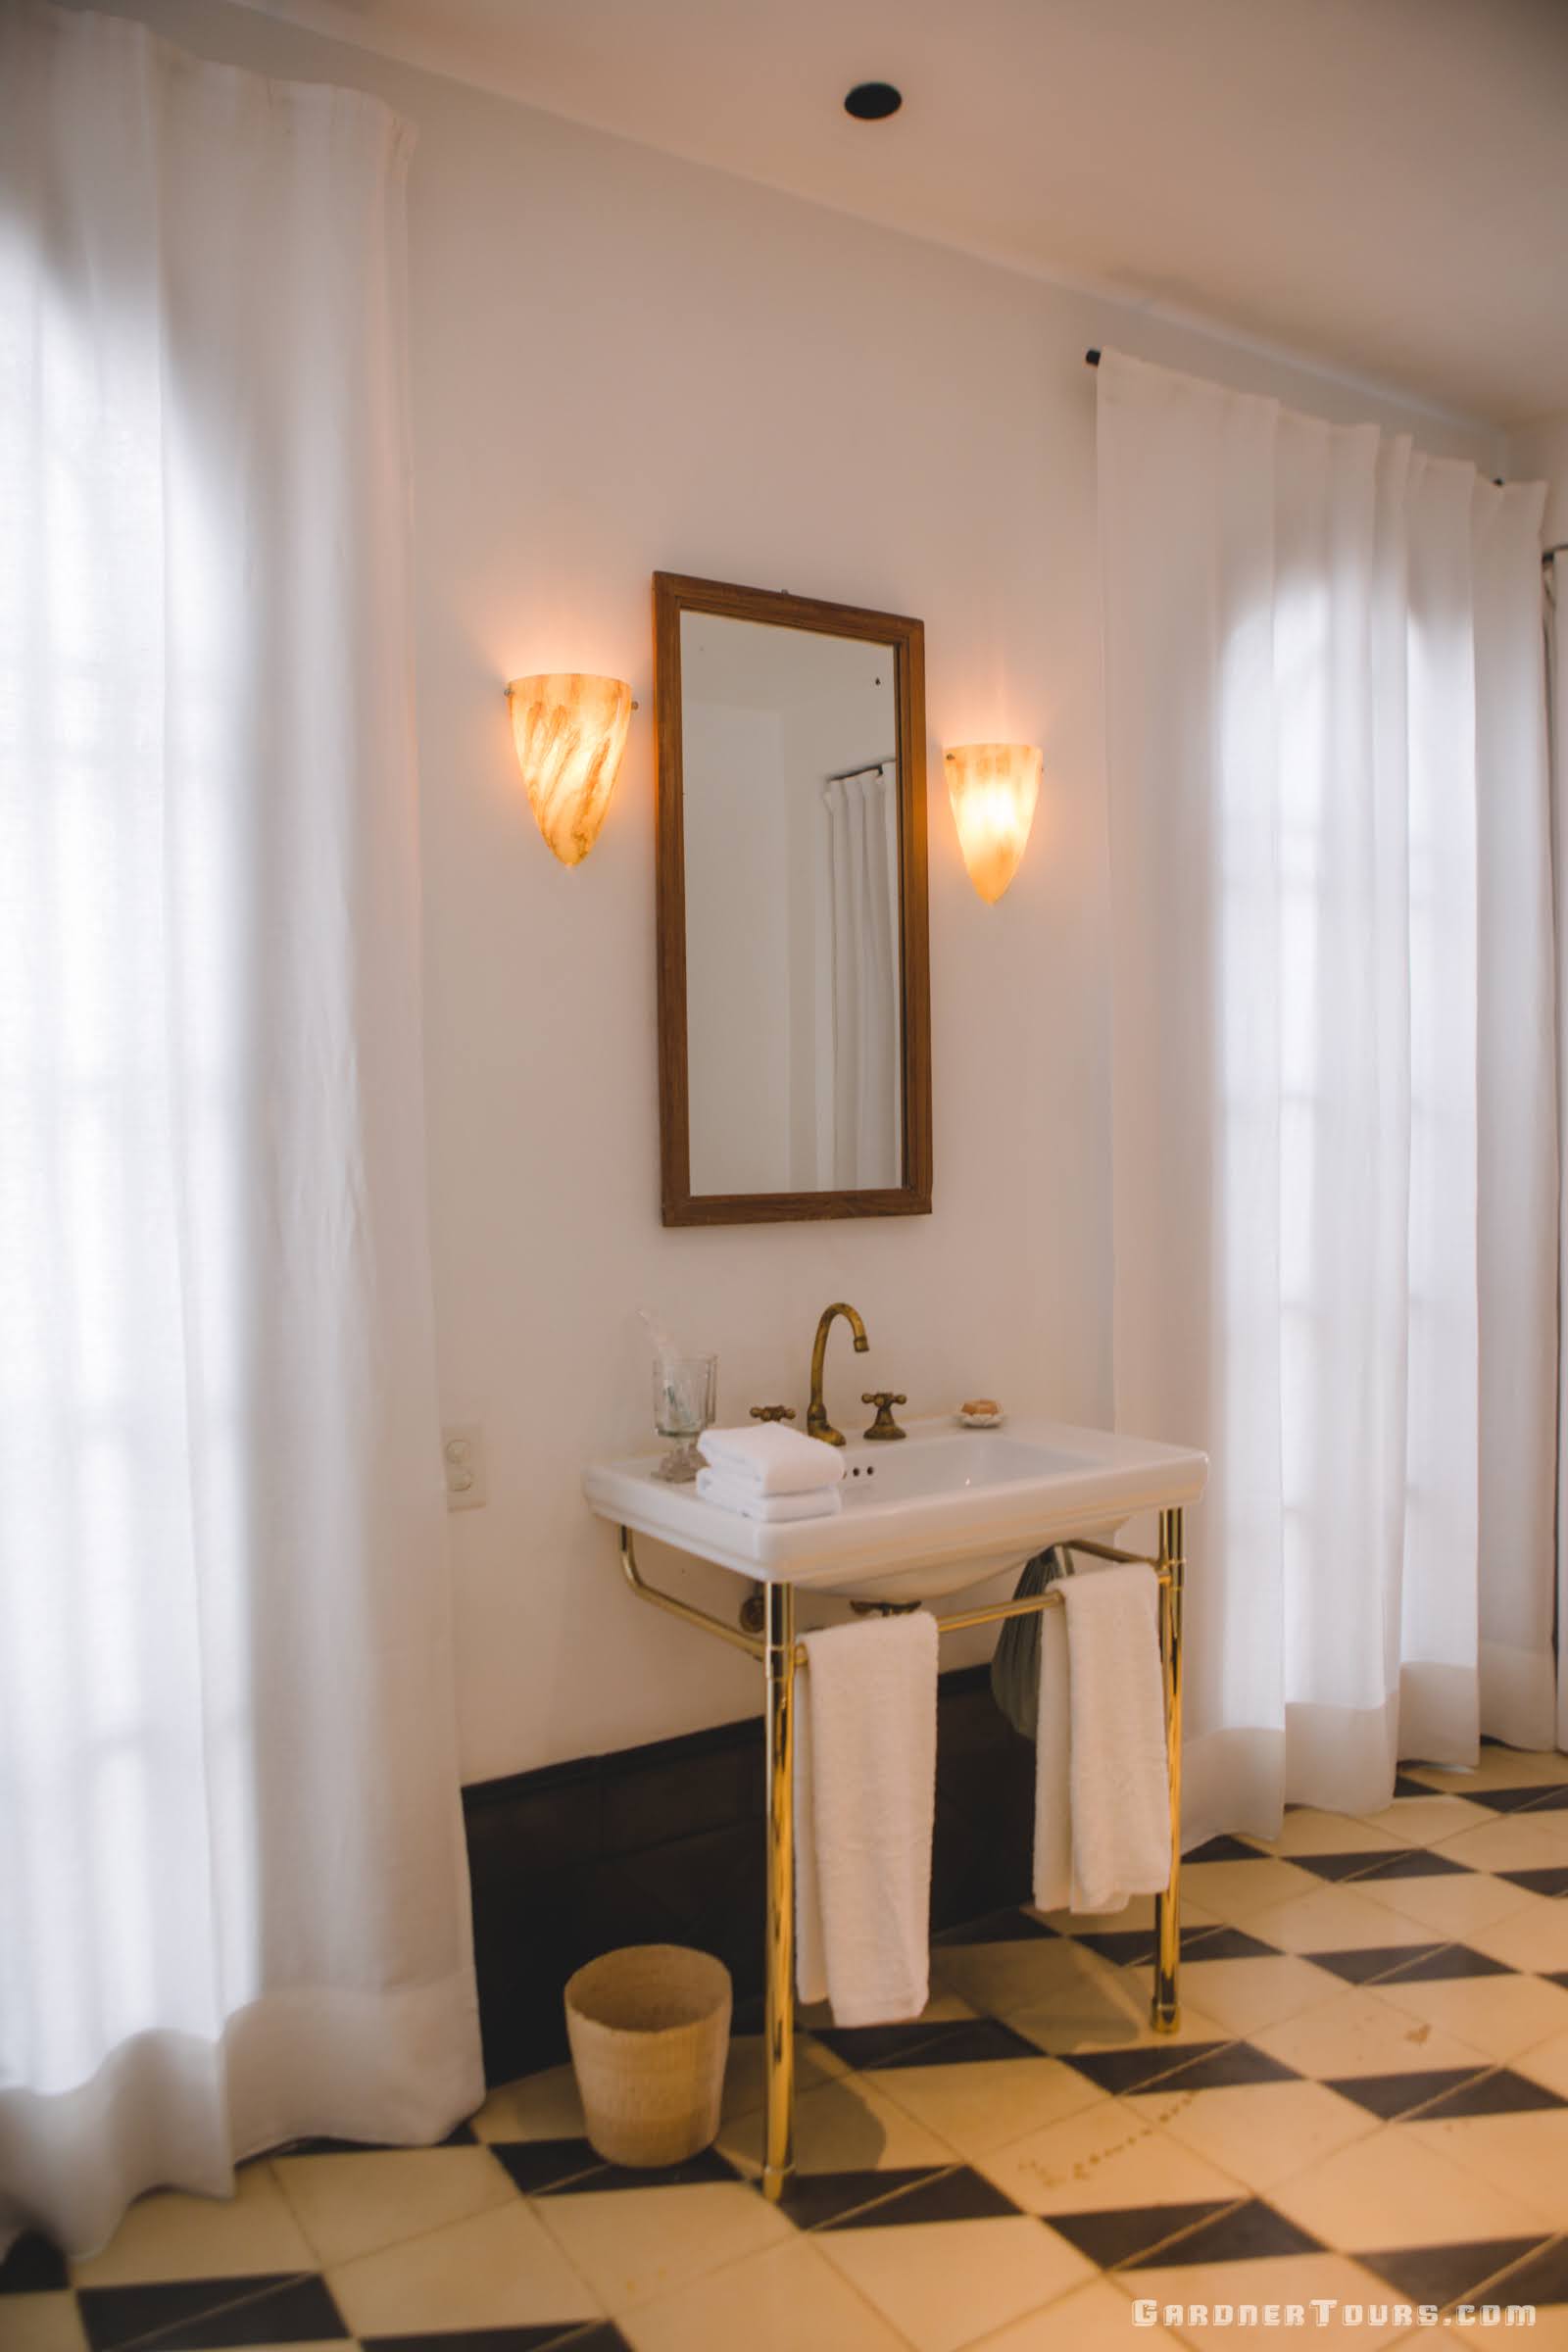 Luxurious Bathroom with Gold, Black, and White Decor in 5-star Luxury Accommodations in Old Havana, Cuba